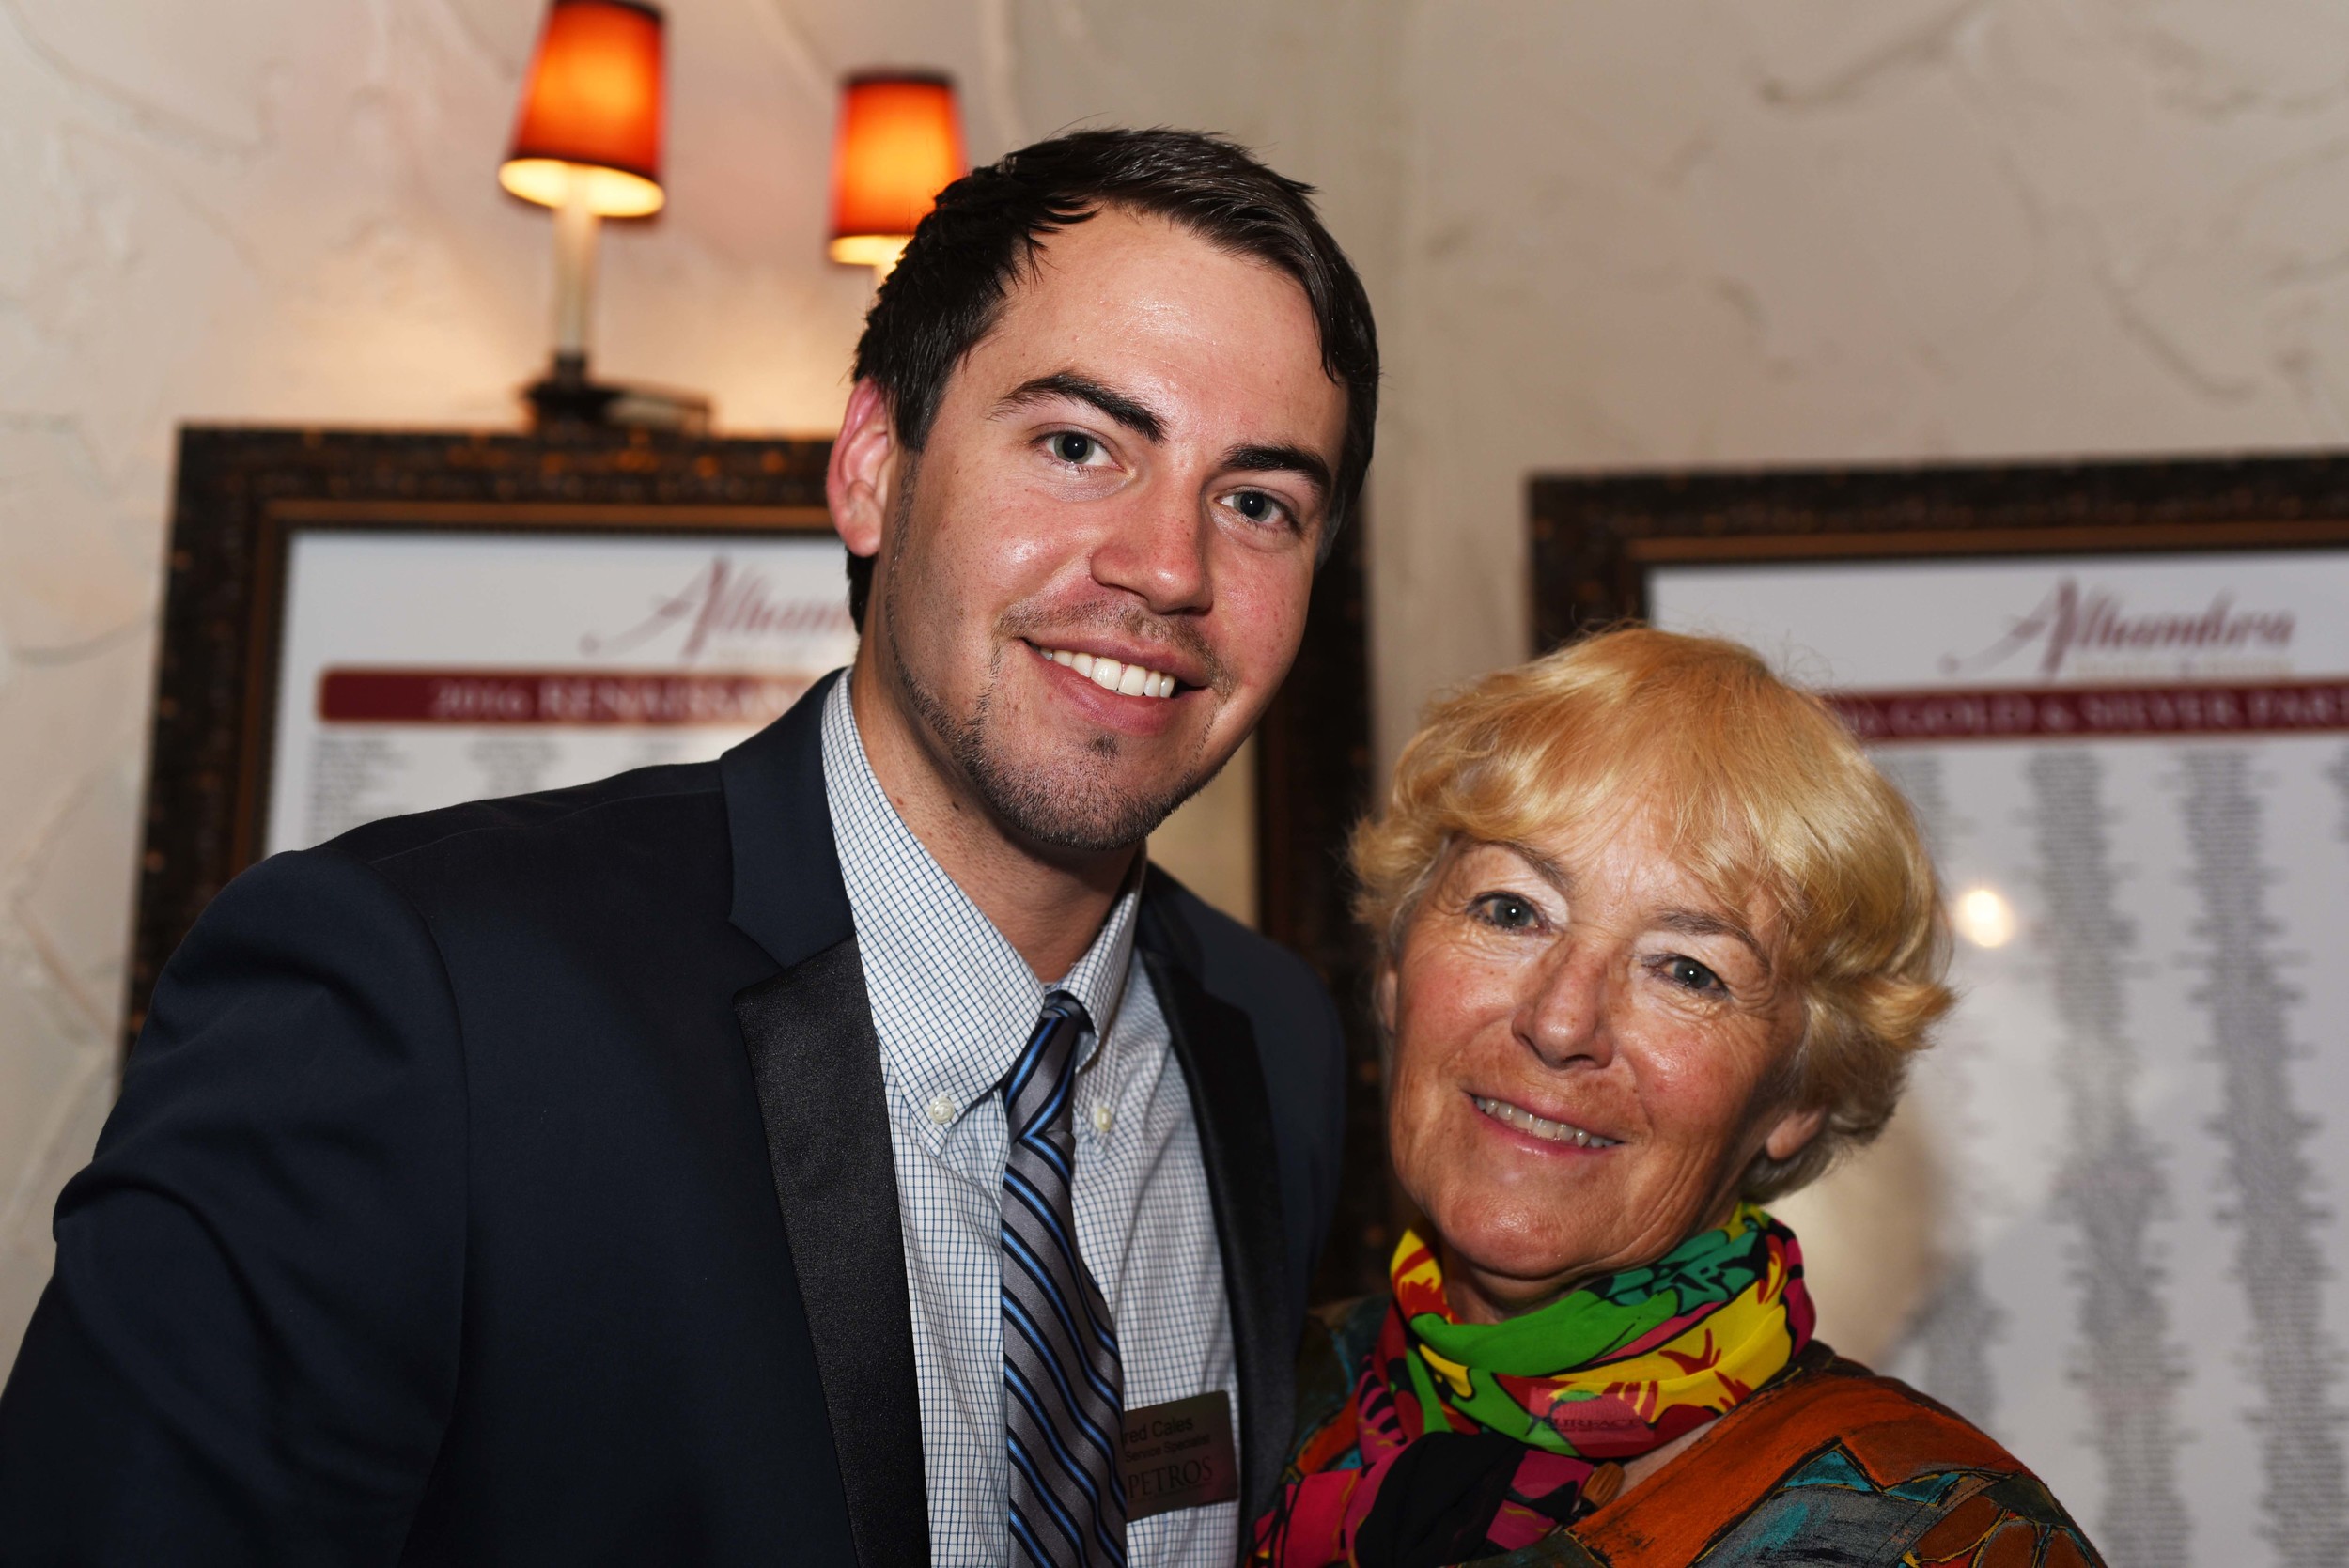 Jared Cales, client service specialist for Petros Estate & Retirement Planning with Nancy Grasso